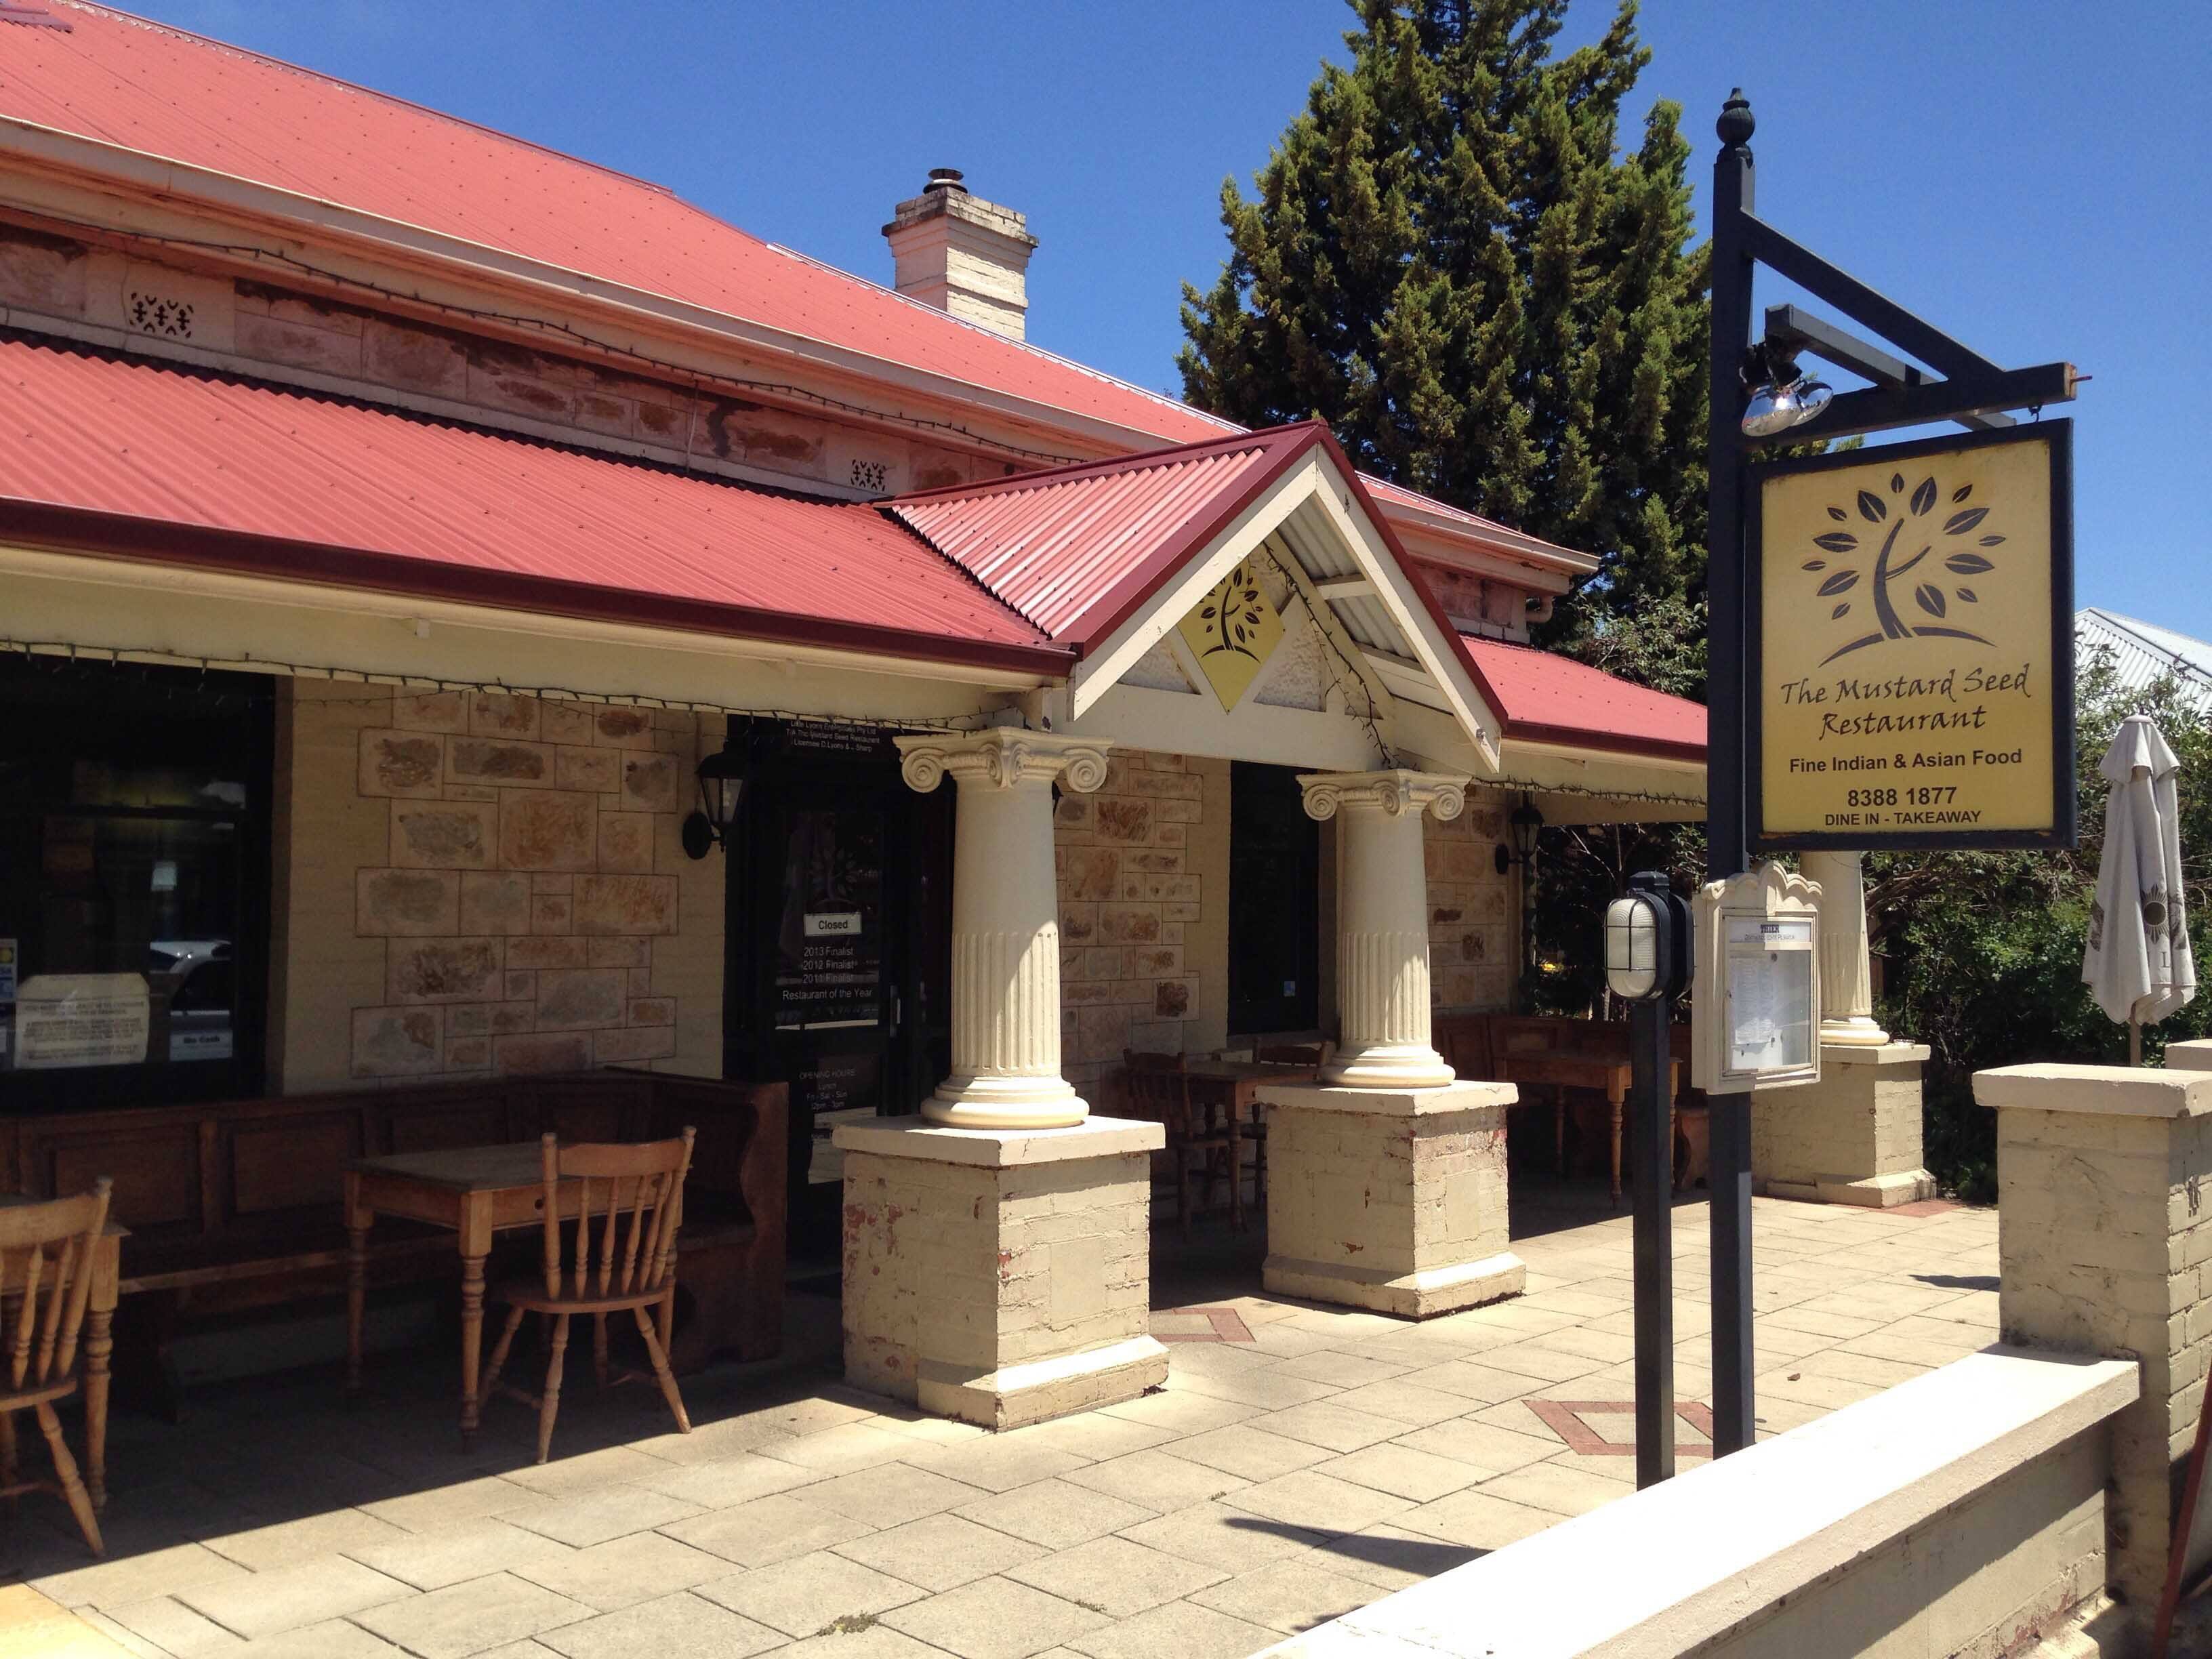 The Mustard Seed Restaurant Reviews User Reviews For The Mustard Seed Restaurant Hahndorf Adelaide